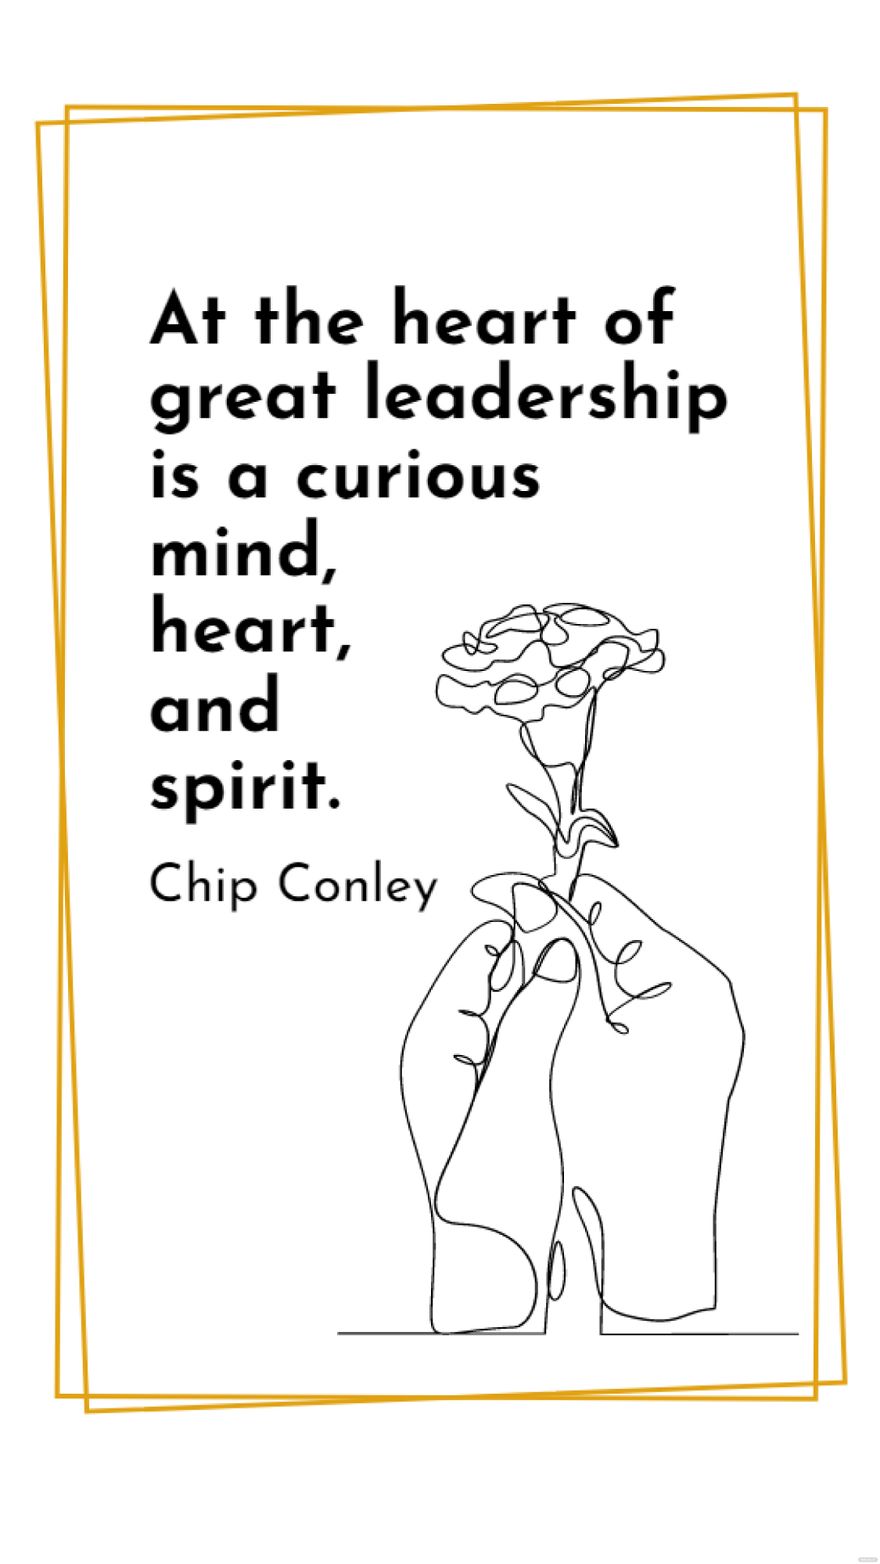 Chip Conley - At the heart of great leadership is a curious mind, heart, and spirit.